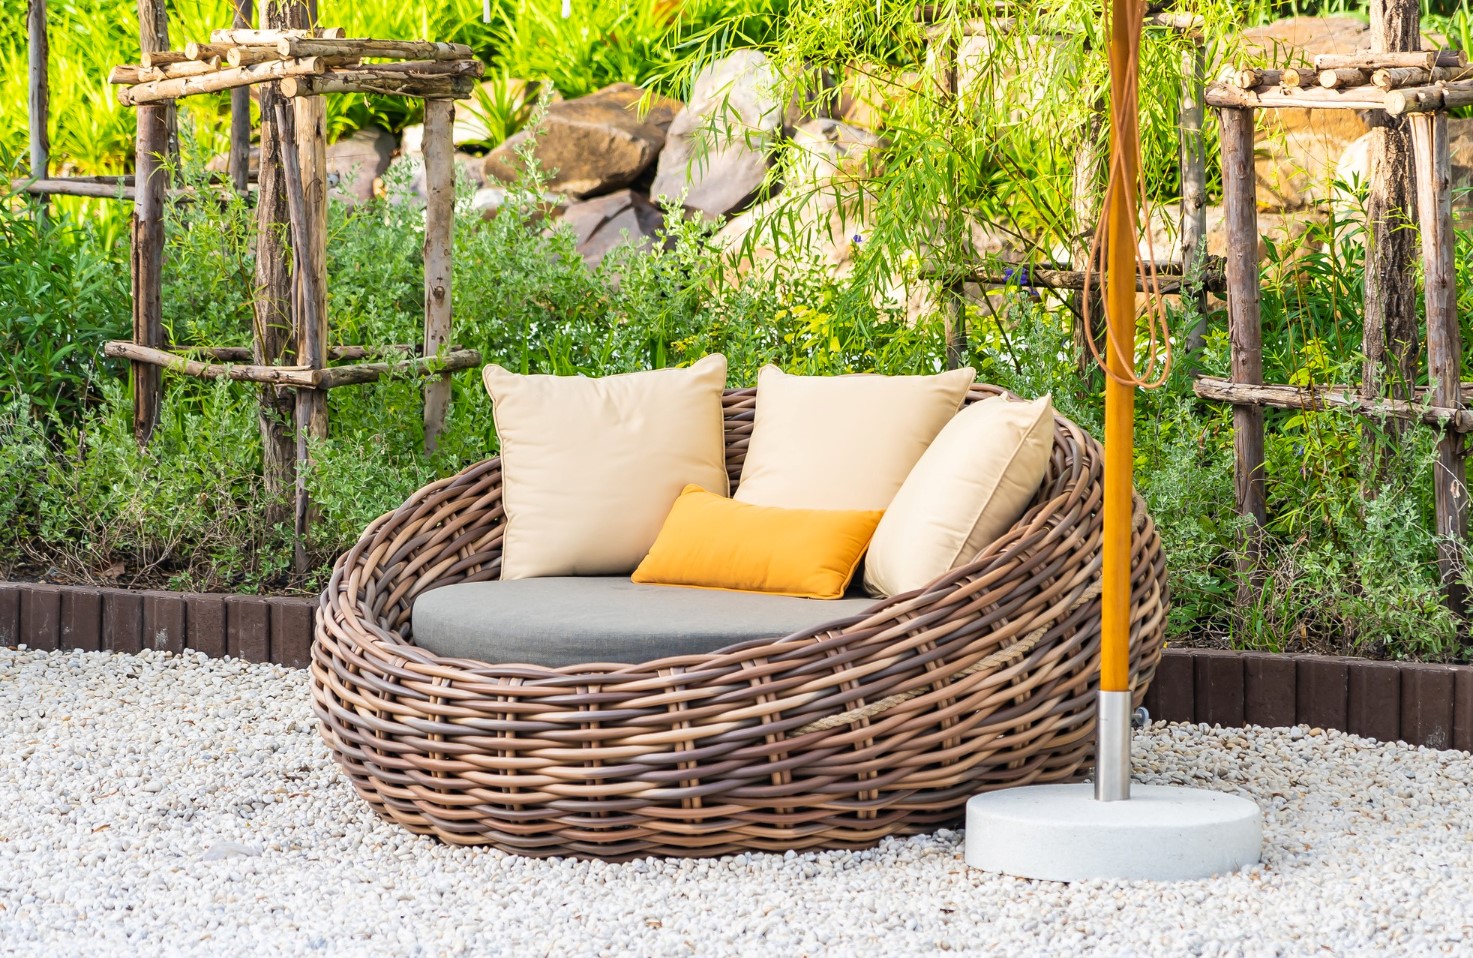 Image depicting outdoor waterproof cushions and outdoor furniture, designed to resist water, making them suitable for any condition.